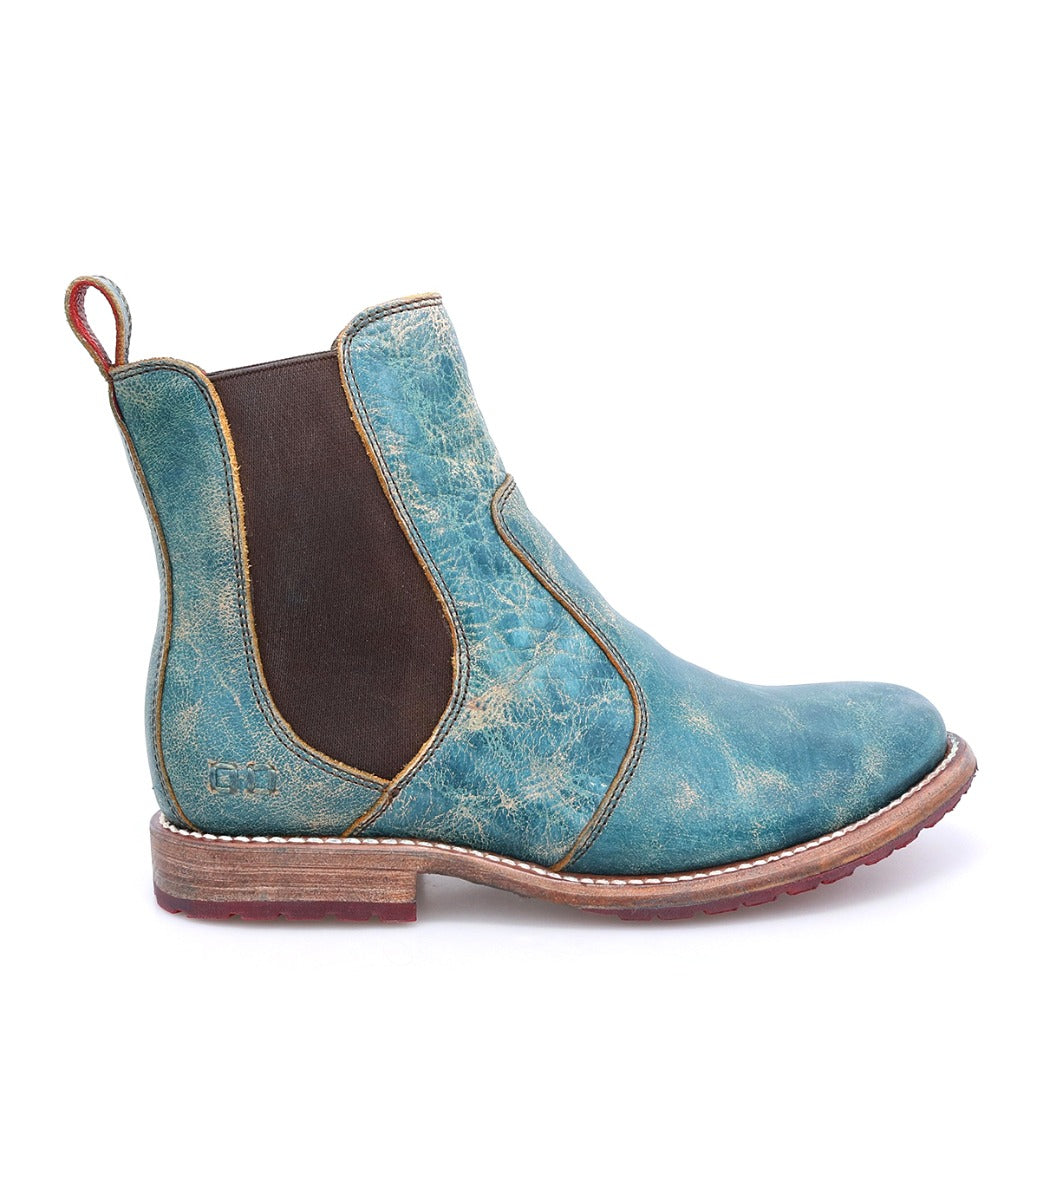 A Nandi teal pure leather chelsea boot by Bed Stu.